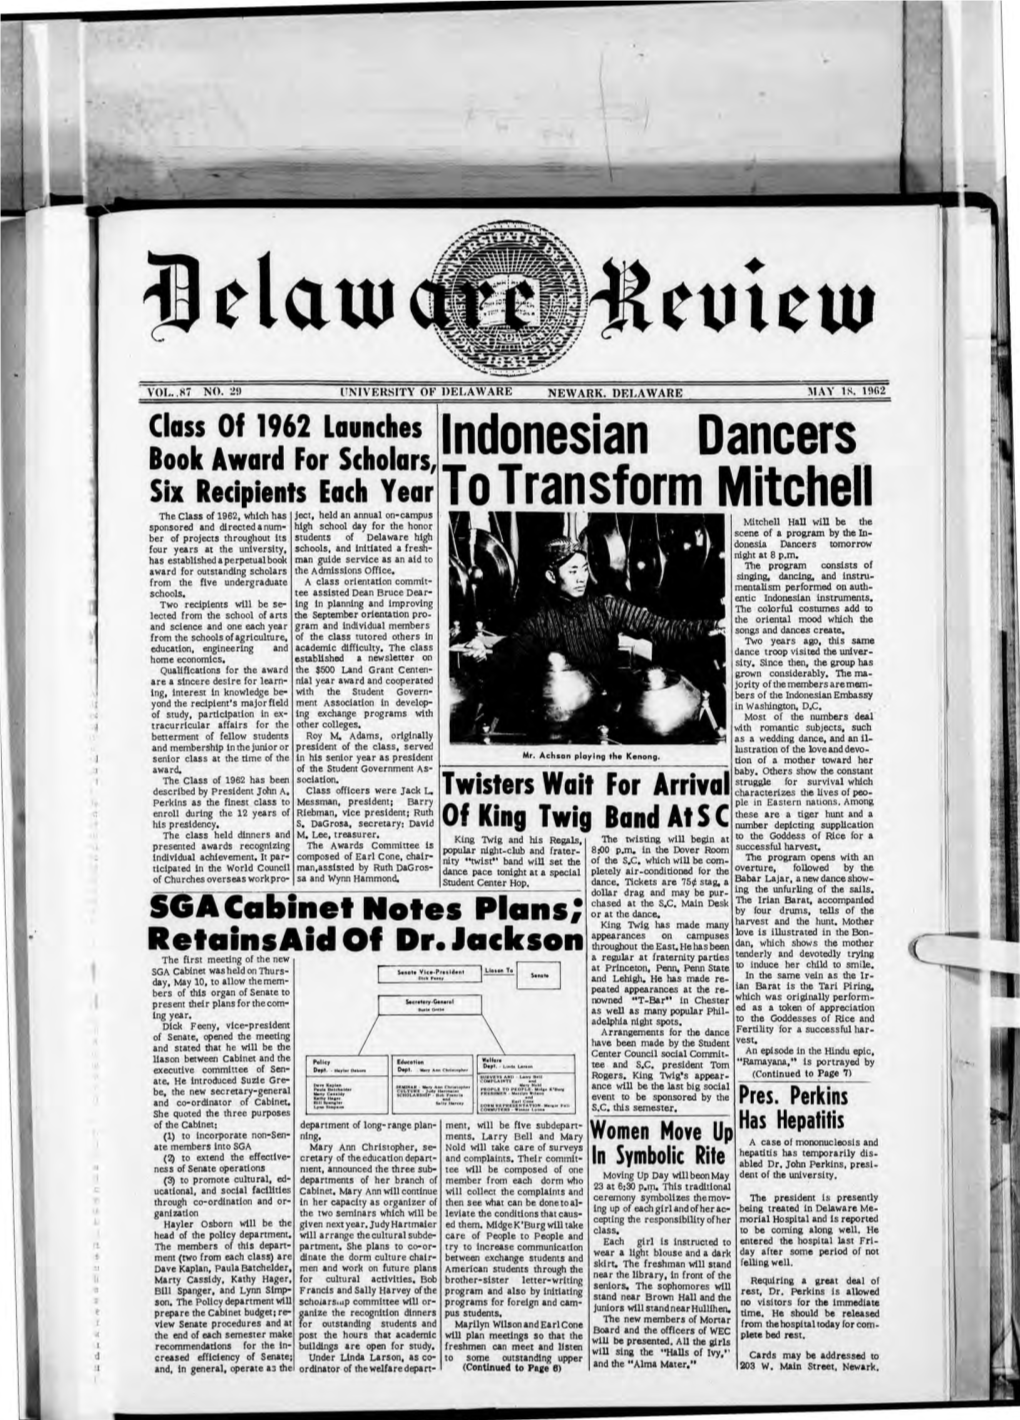 Class Ot 1962 Lau•Ches Indonesian Dancers Book Award for Scholars, F